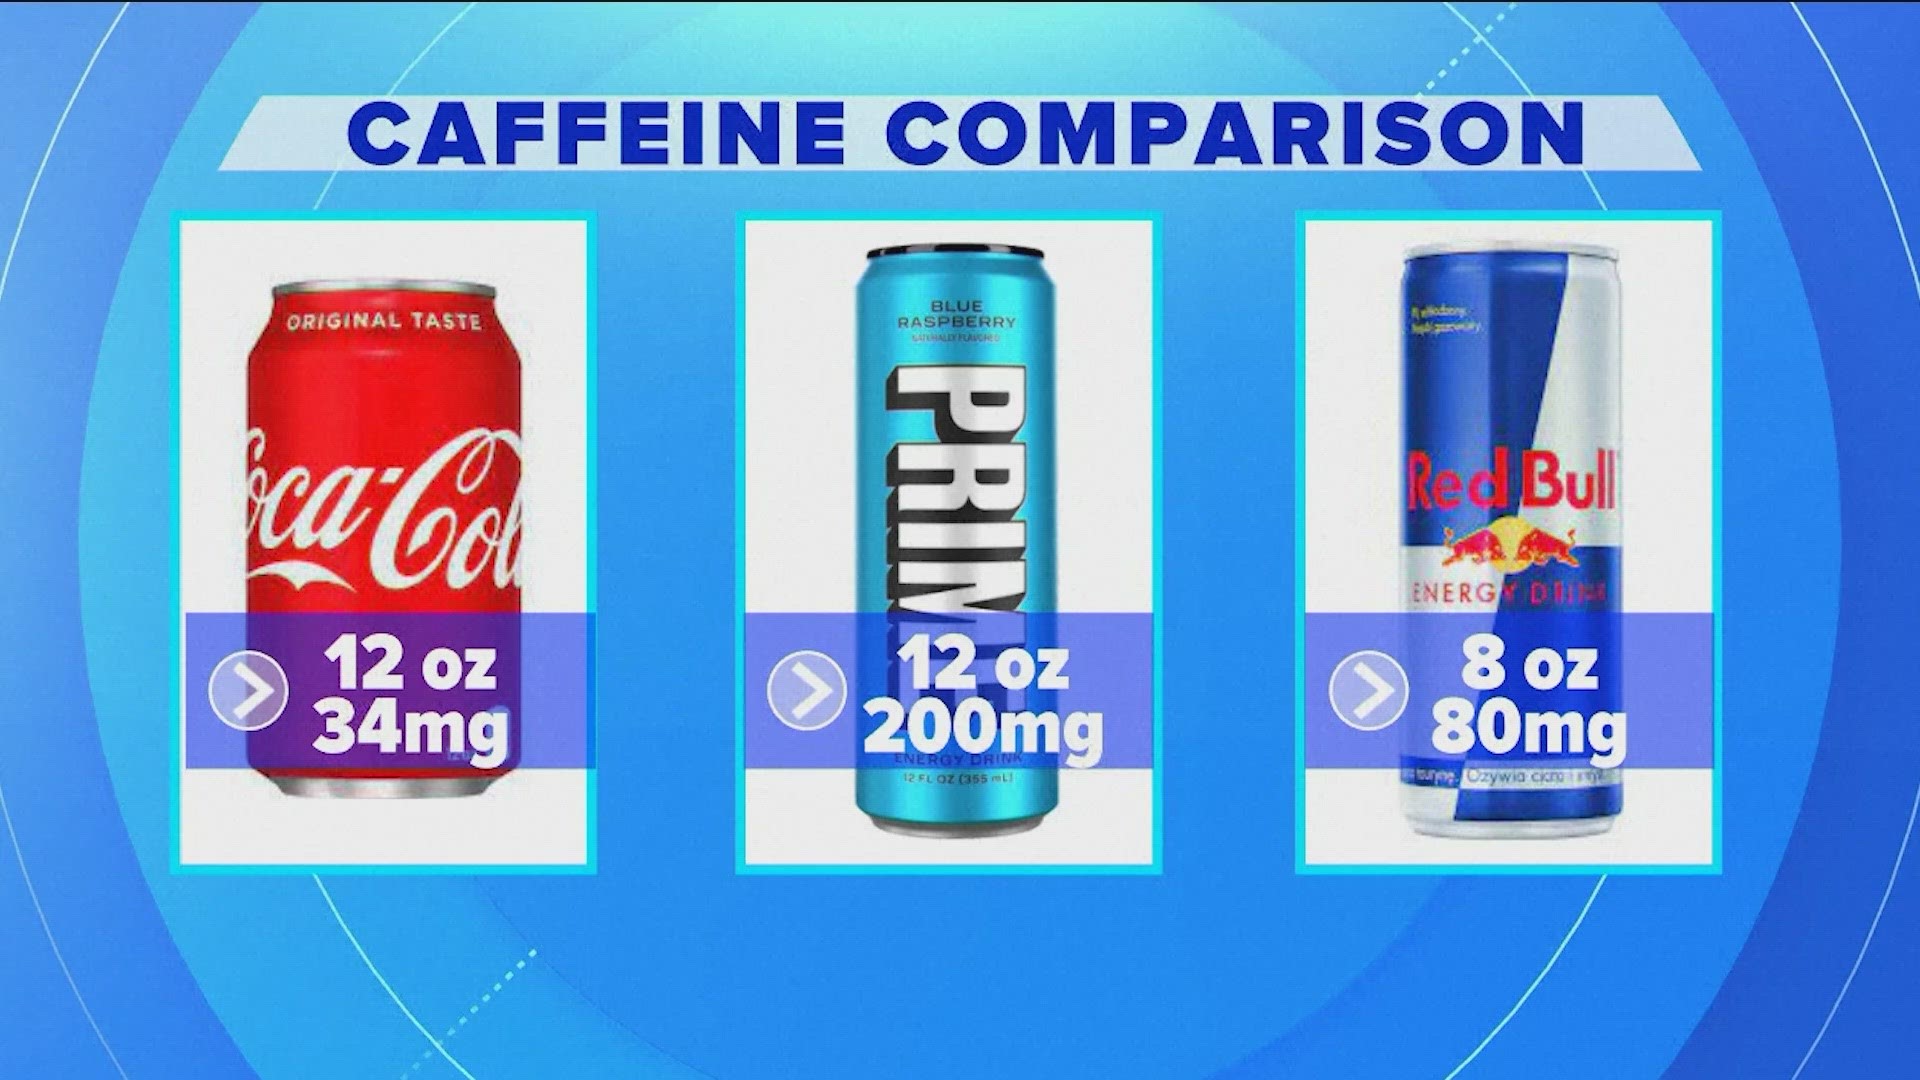 Lawmakers ask FDA to look into energy drinks